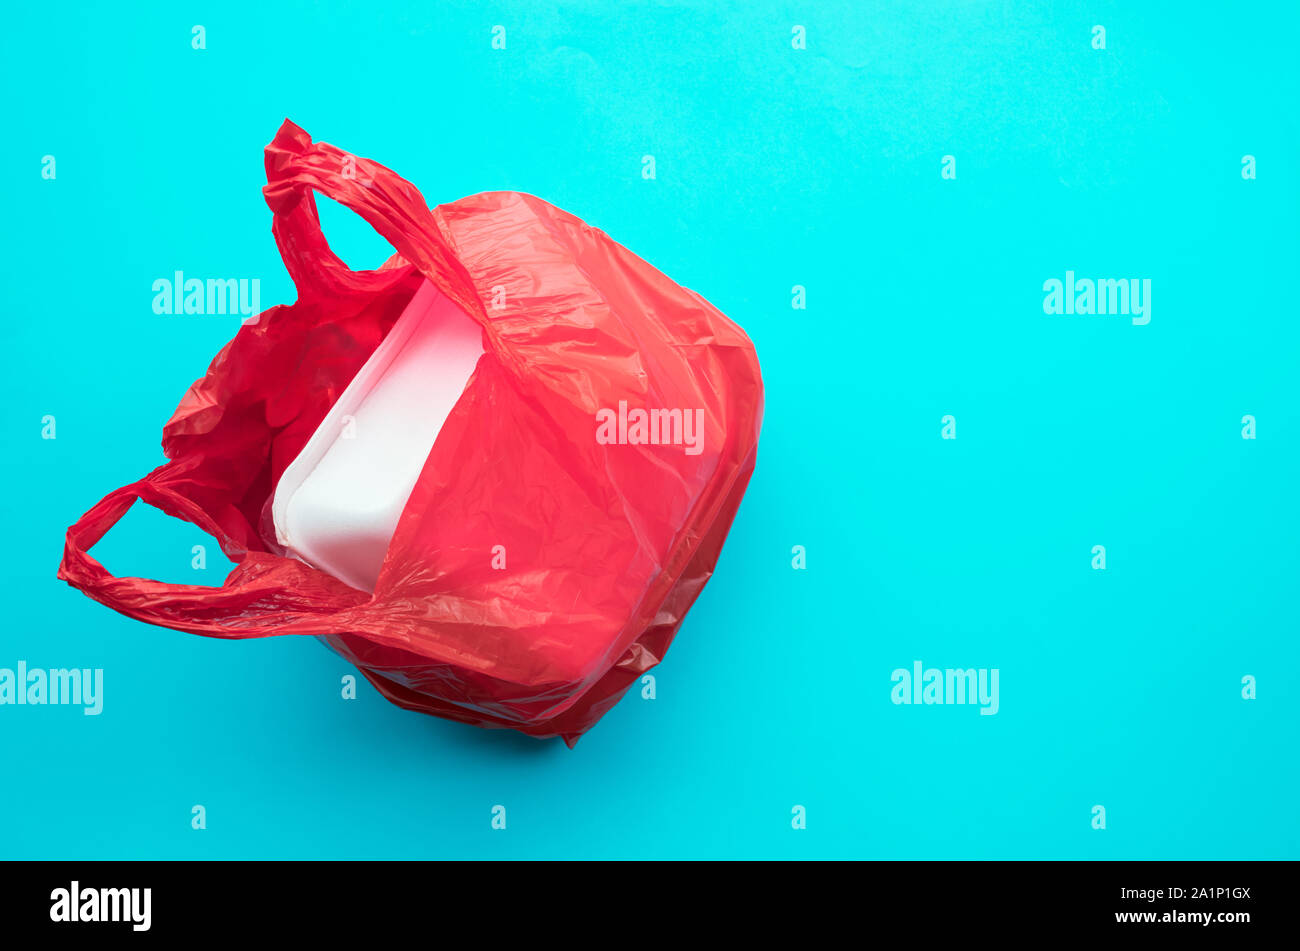 Waste, Red Garbage Bag Plastic with Concept the Color of Red